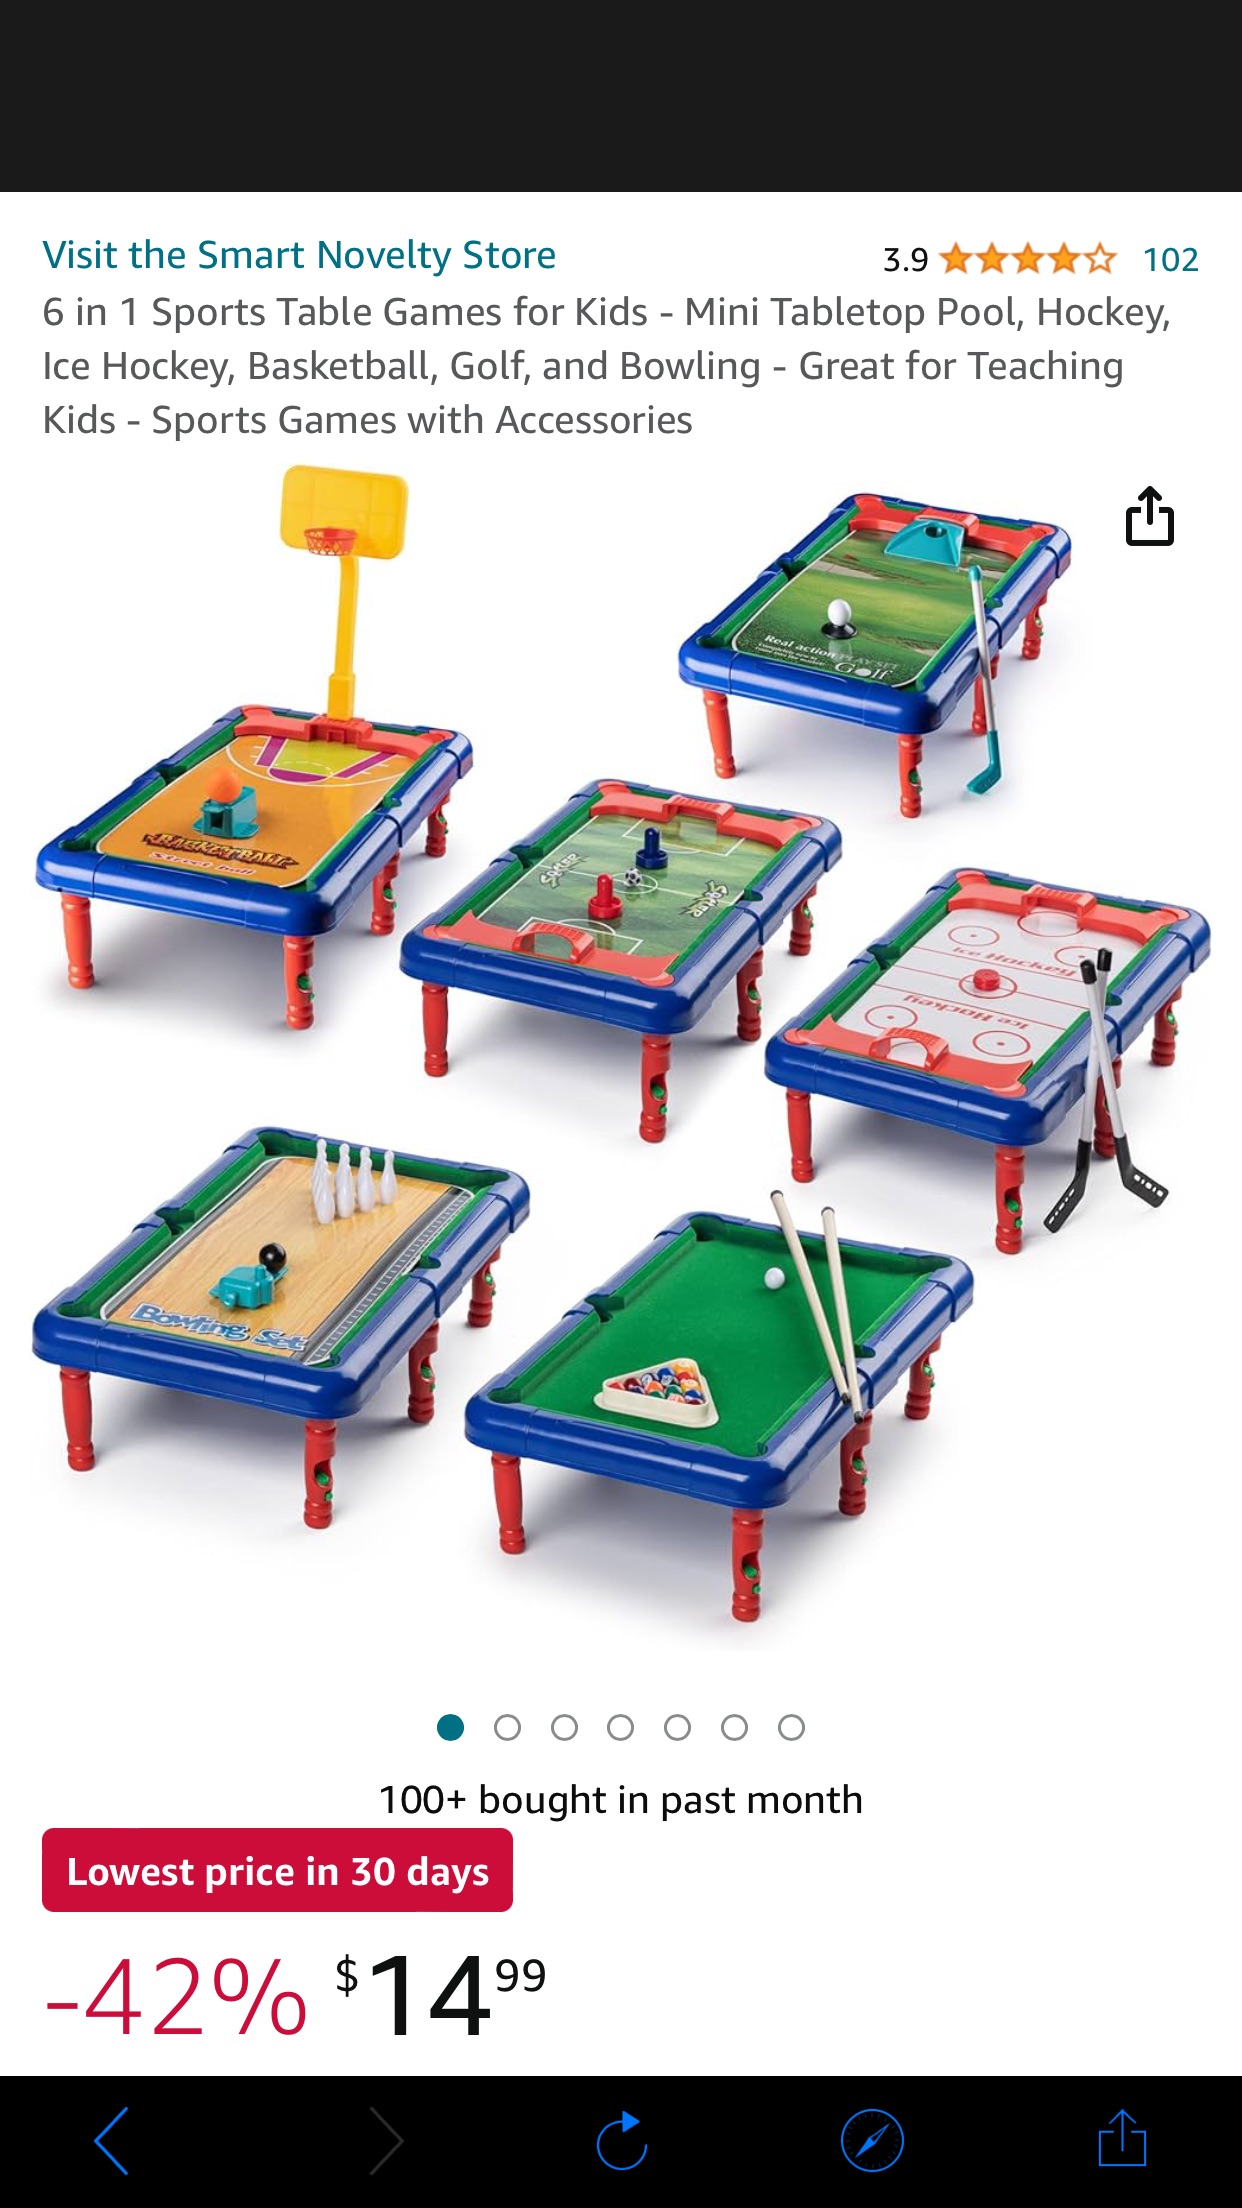 Amazon.com: 6 in 1 Sports Table Games for Kids - Mini Tabletop Pool, Hockey, Ice Hockey, Basketball, Golf, and Bowling